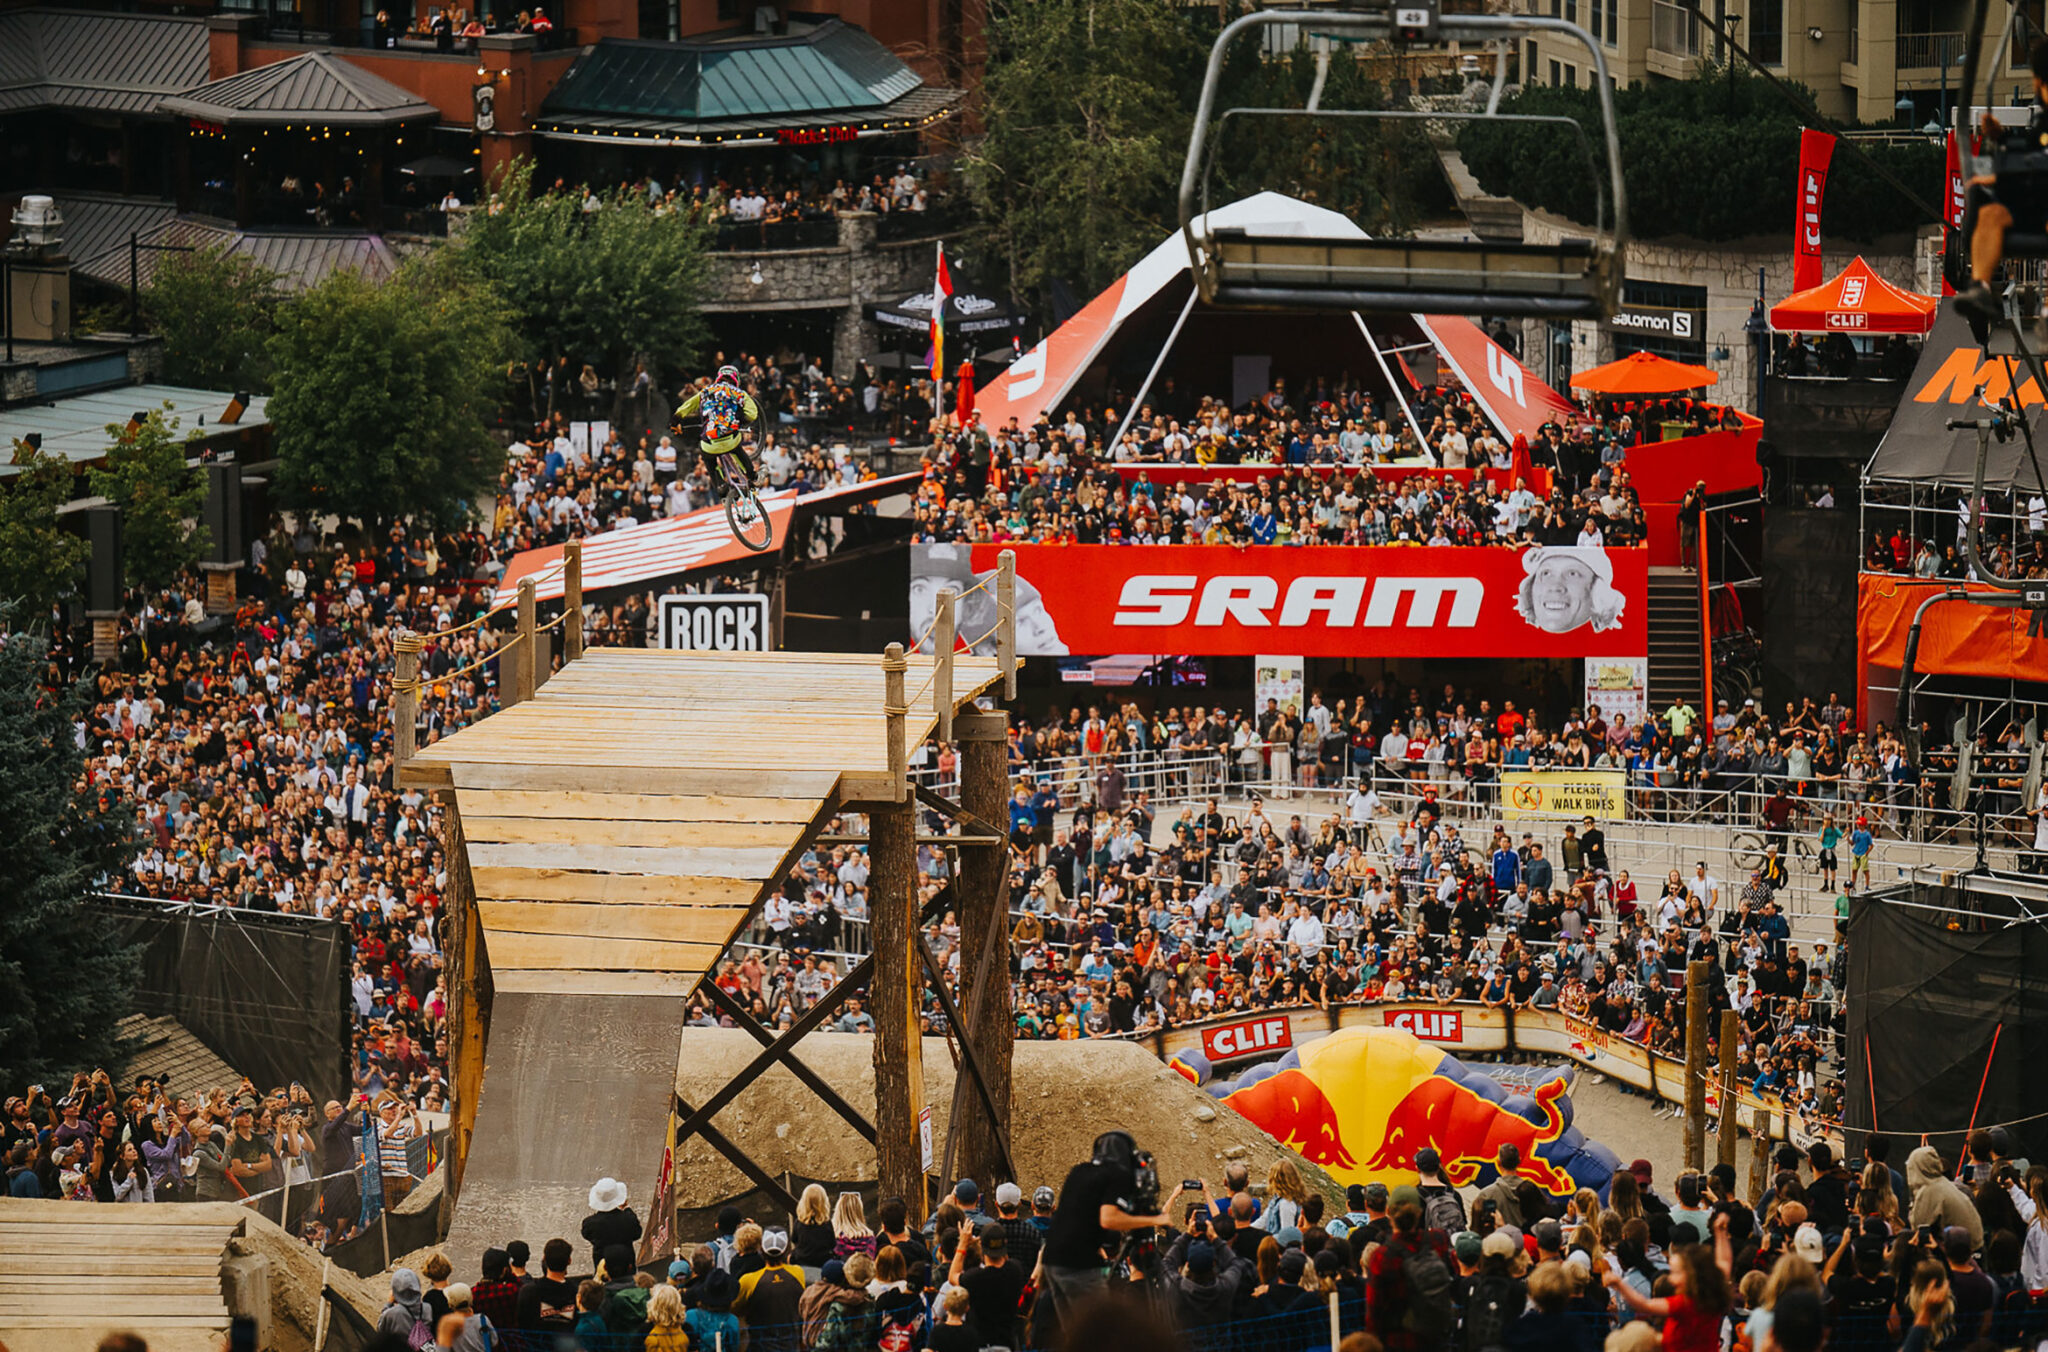 A shot from the hill looking out over the Redbull Joyride crowd as a bike athlete launches off a wooden bridge.